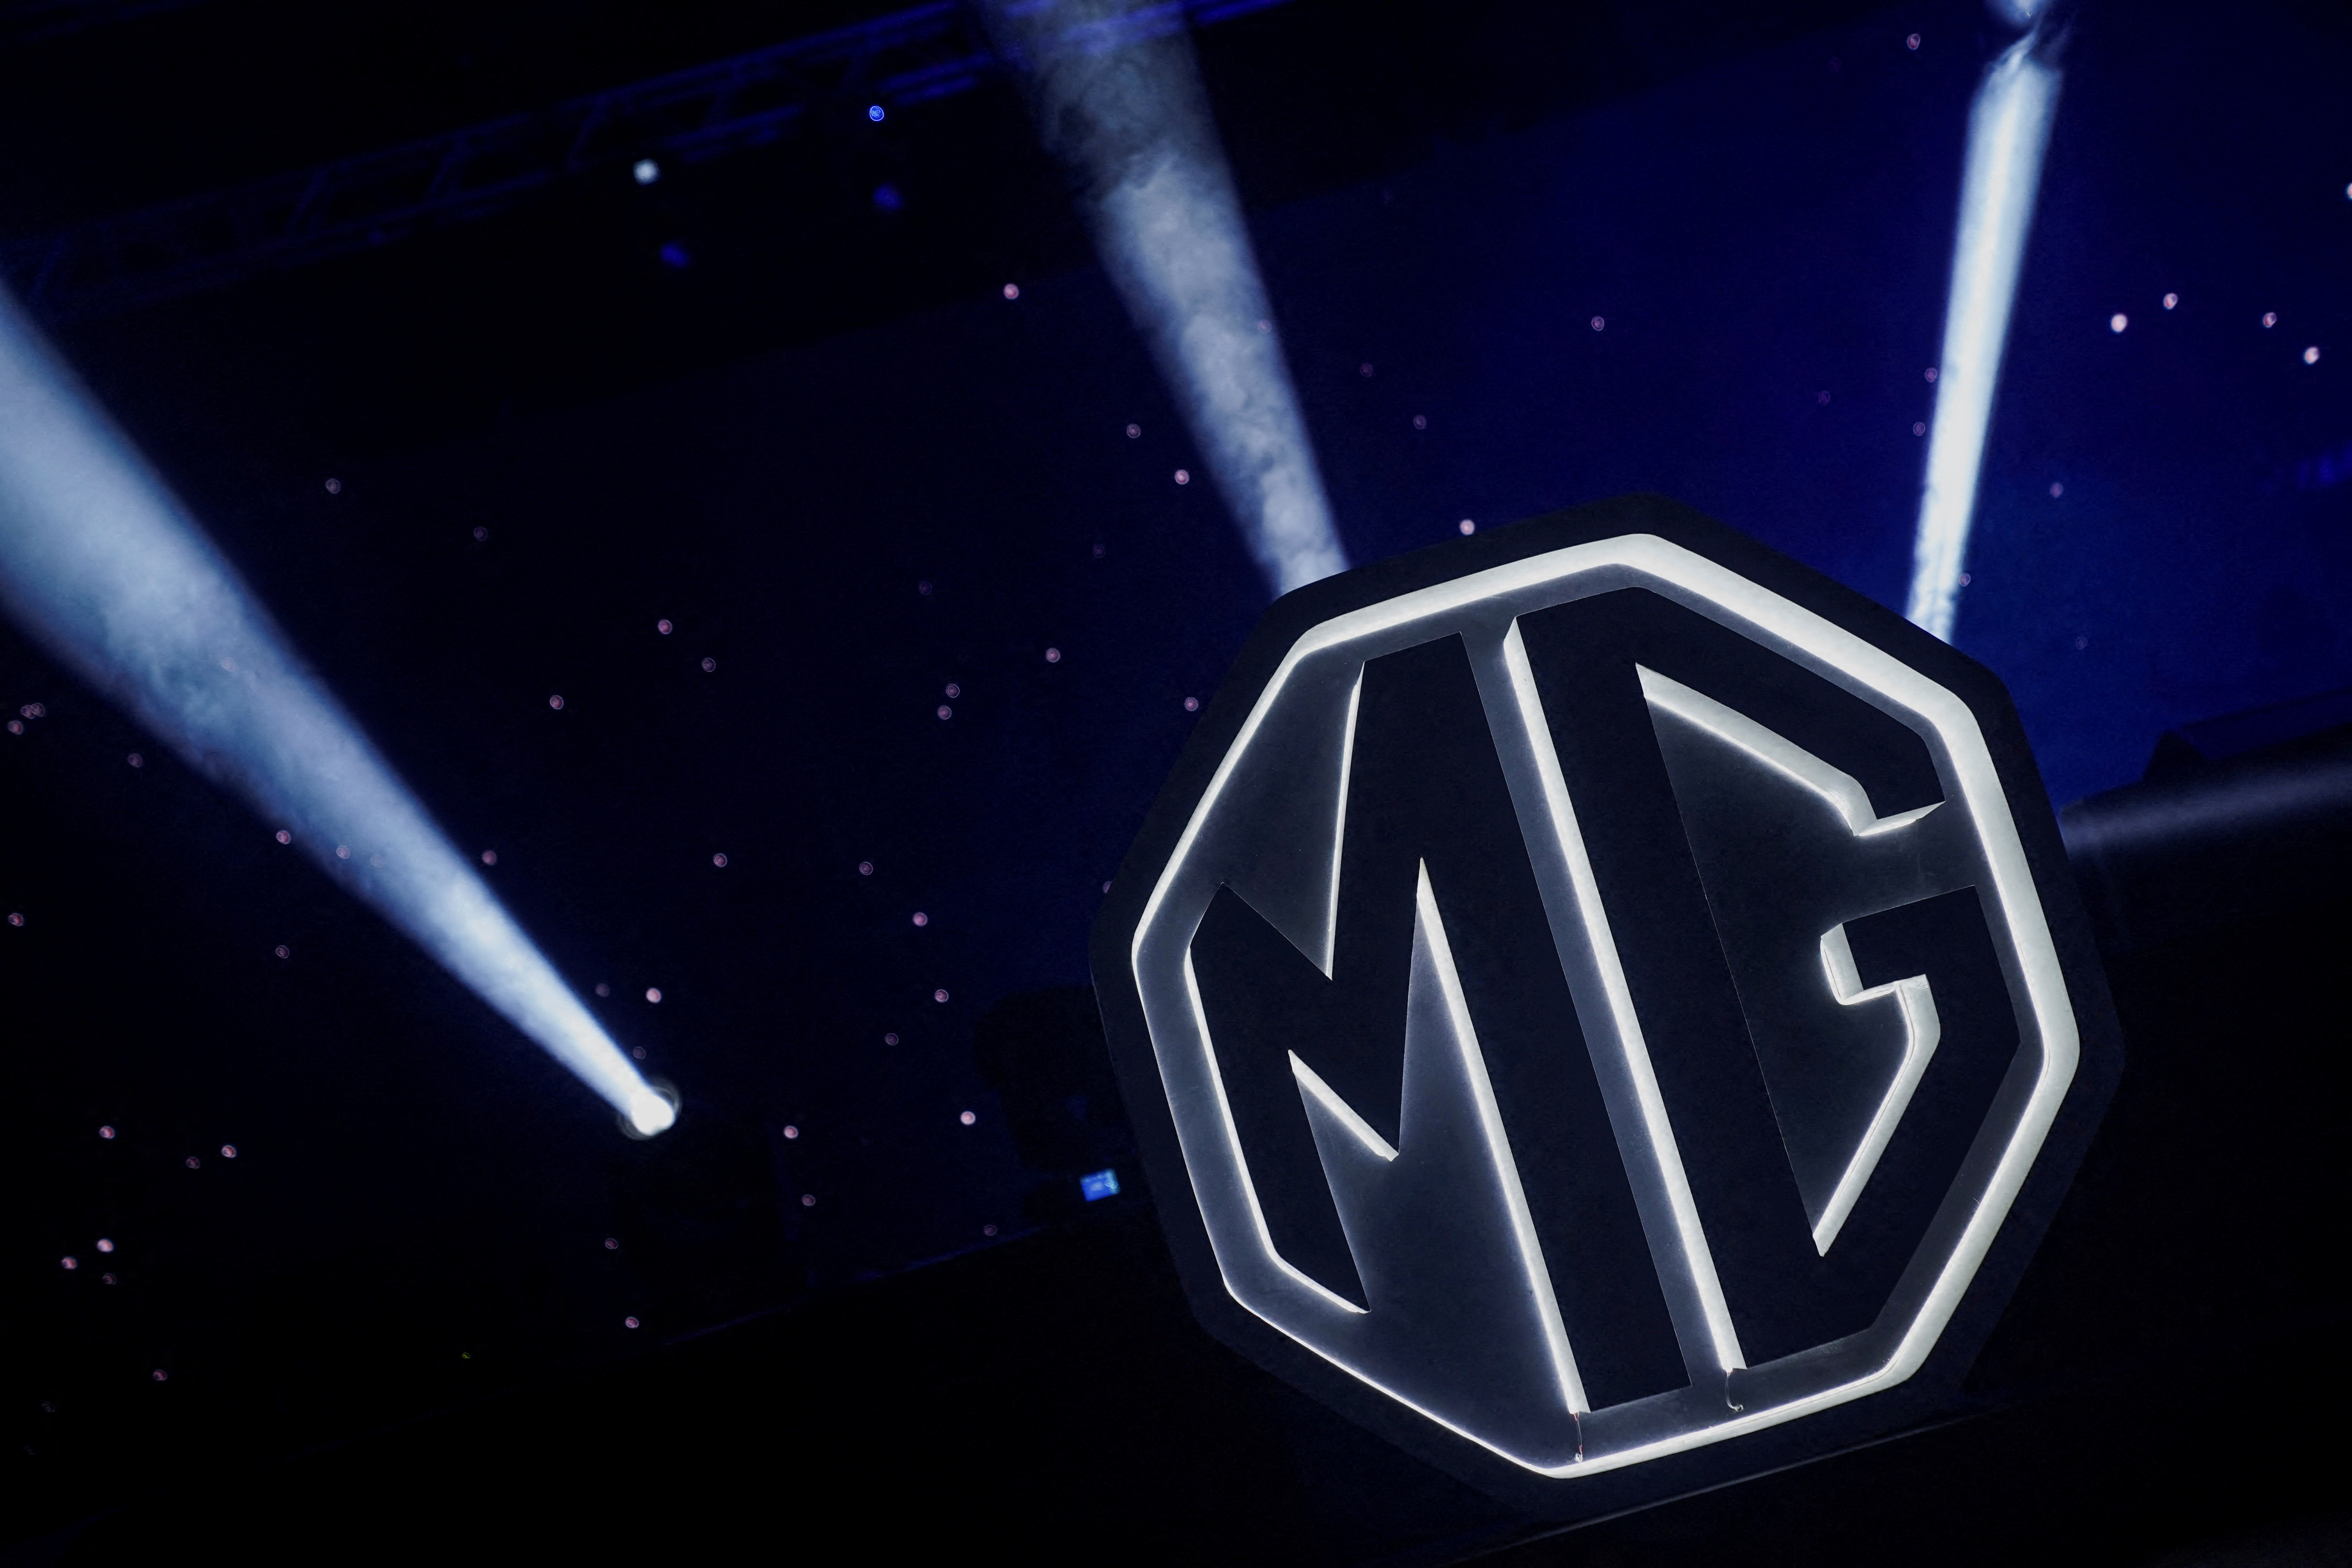 MG Motor Mexico, owned by China's SAIC Motor, launches an electric vehicle